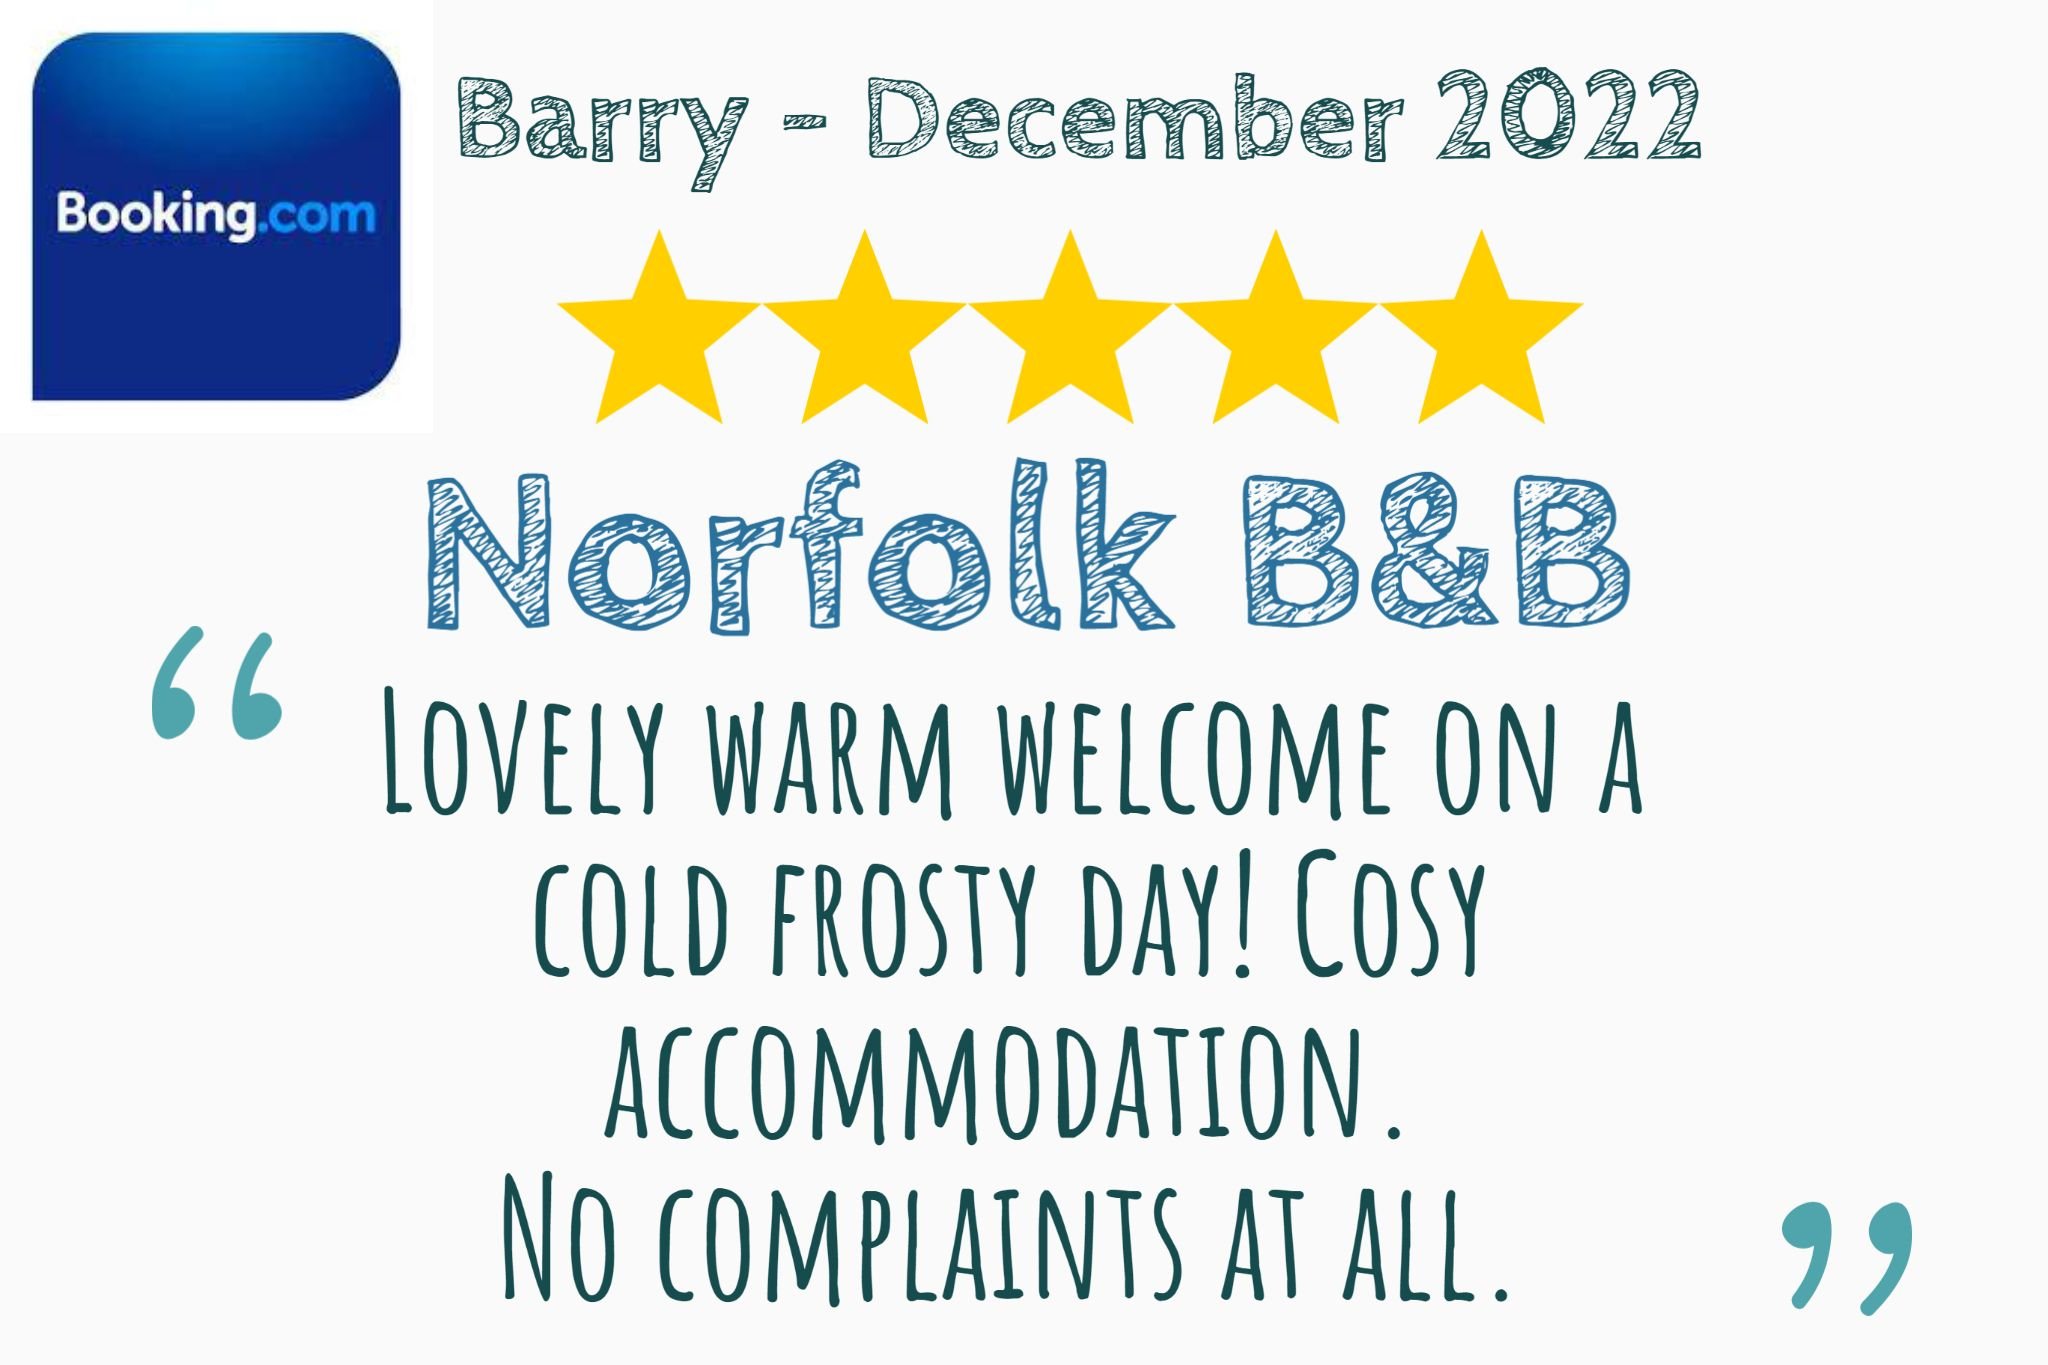 Barry's Booking.com review of a warm welcome on a cold, frosty day